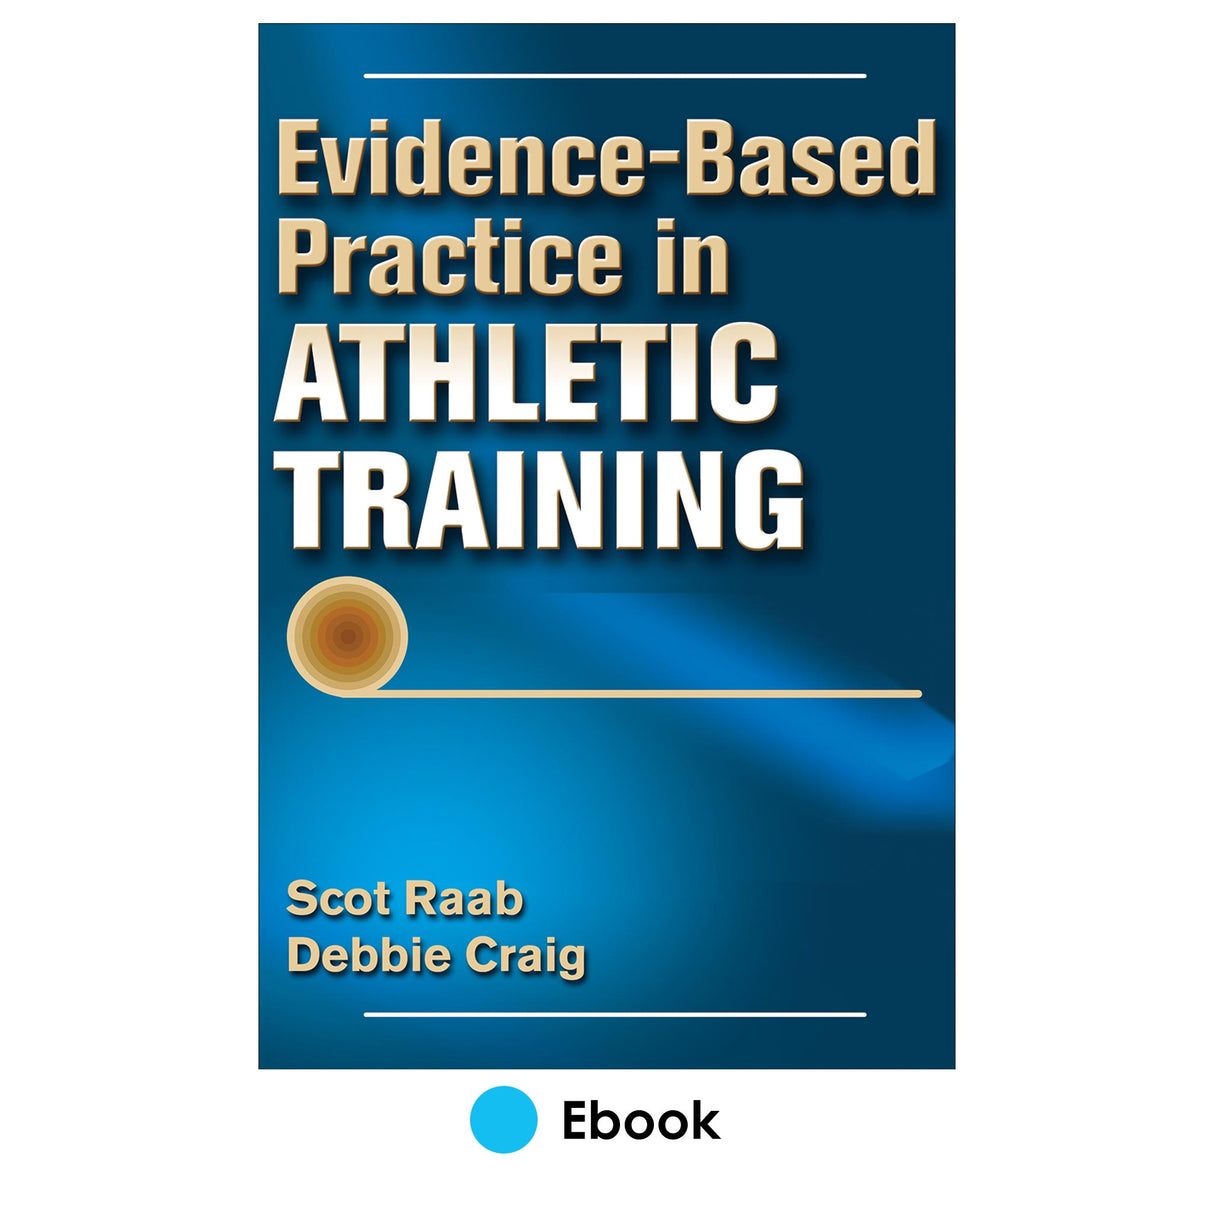 Evidence-Based Practice in Athletic Training PDF